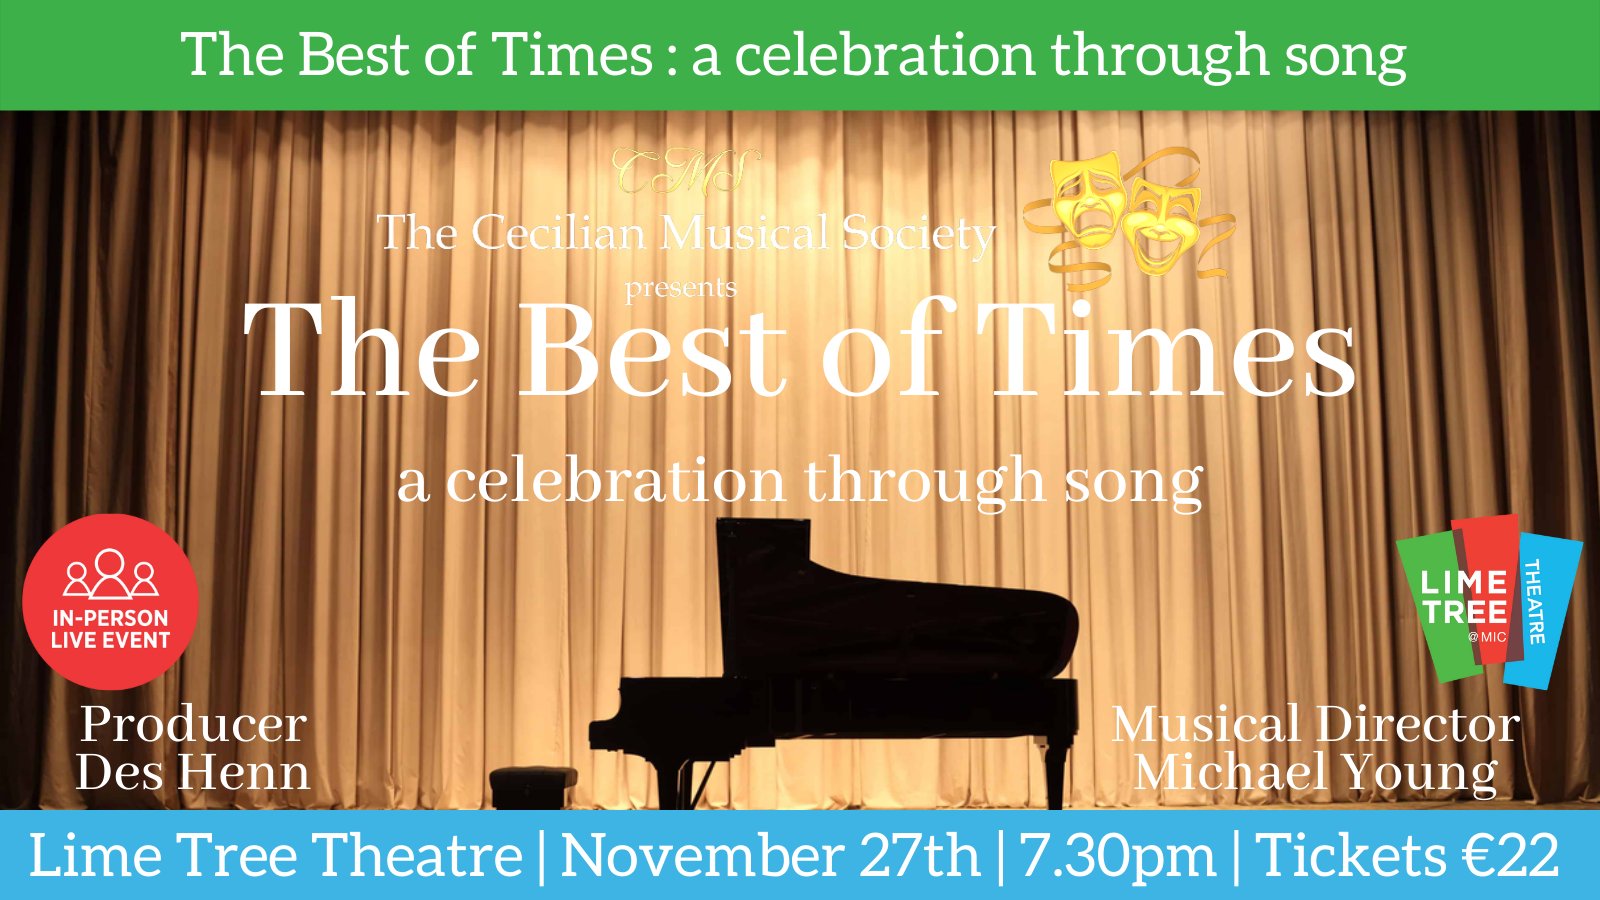 The Best of Times - The Cecilian Musical Society will perform an evening of hits from past showcases on Saturday, November 27.